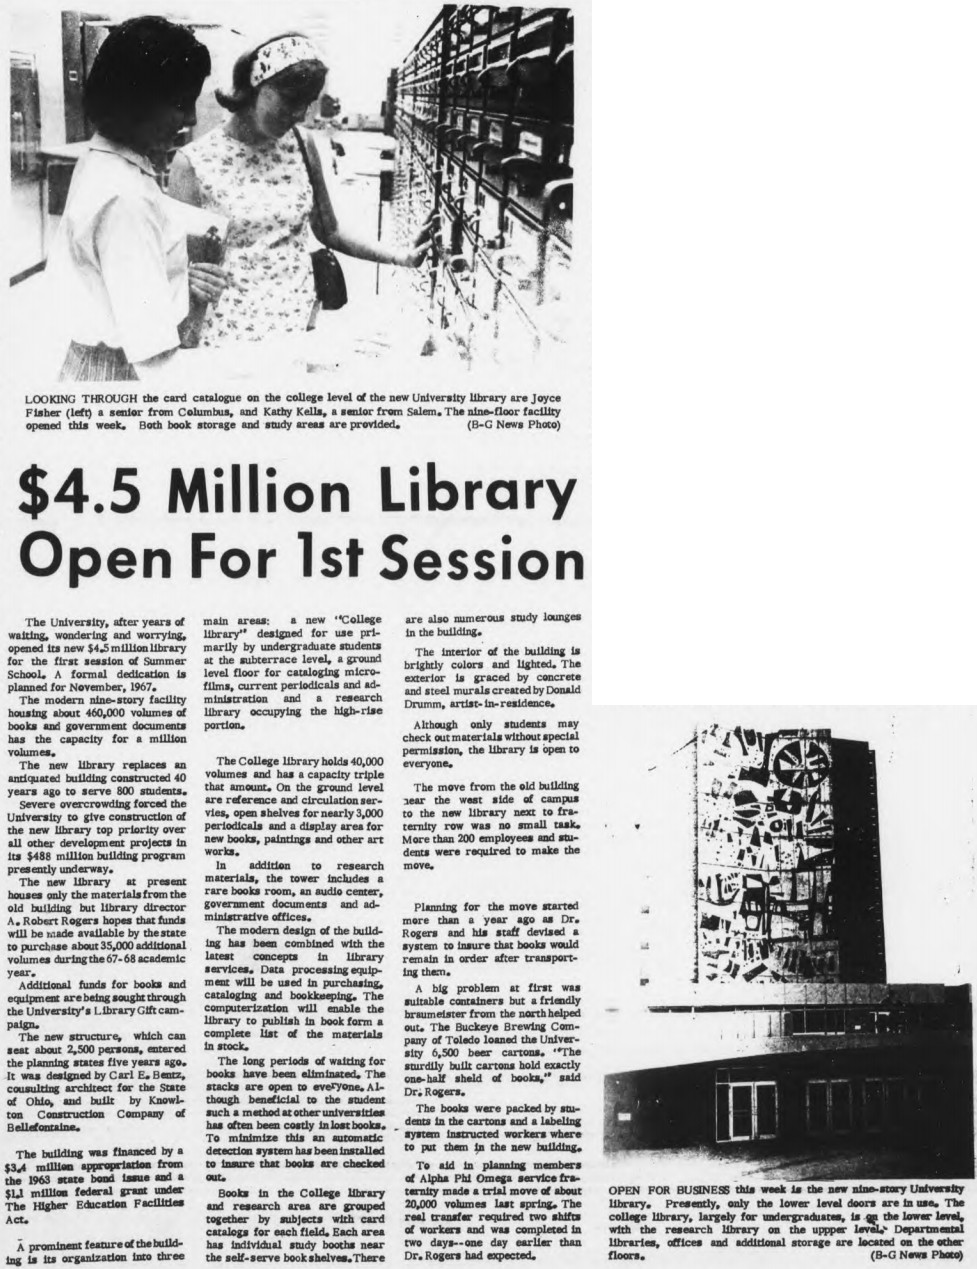 4.5 Million Dollar Library Open for 1st Session